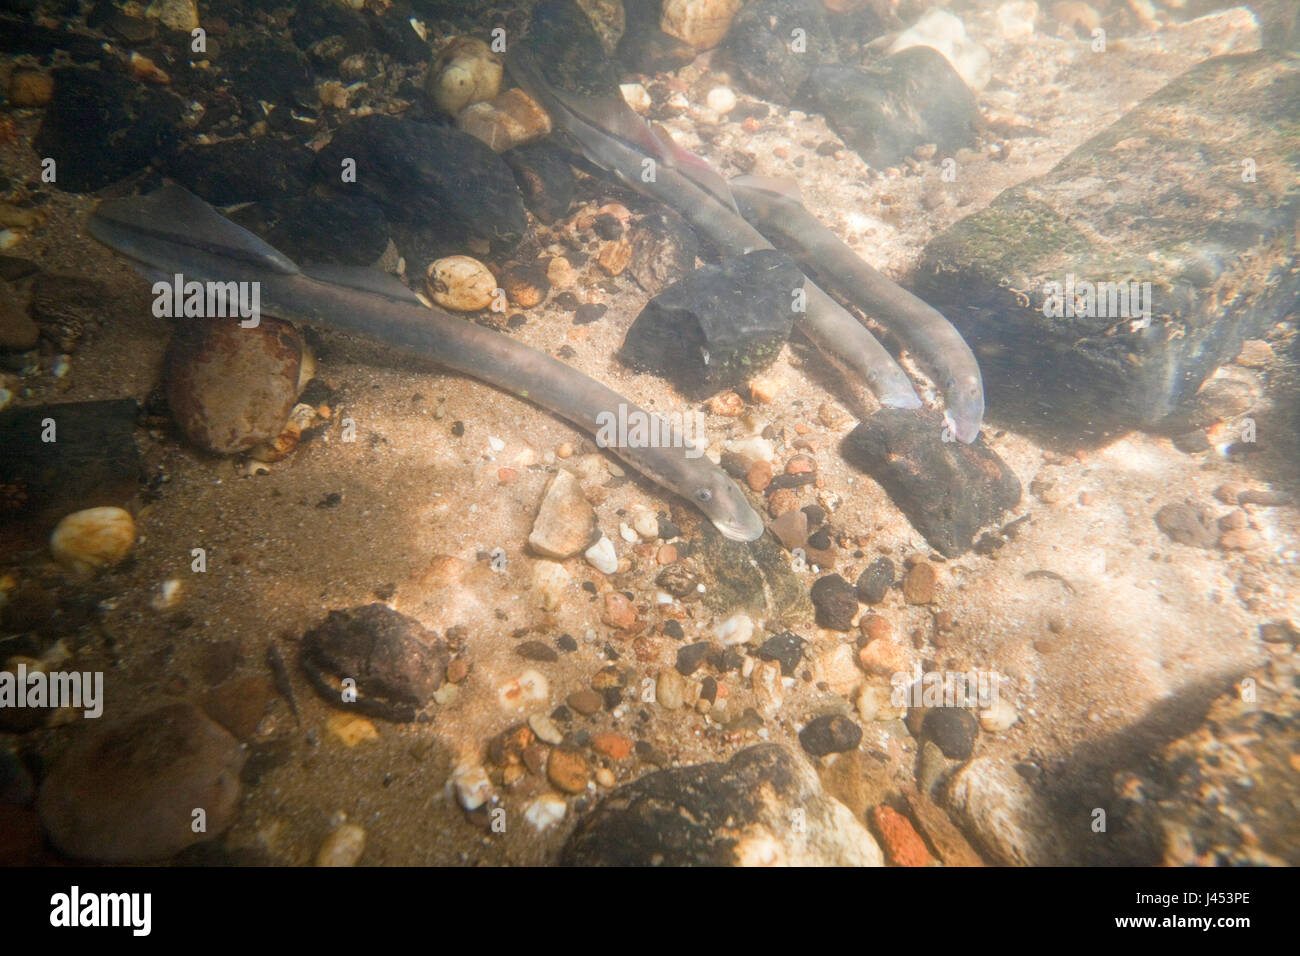 two river lampreys on a spawning site in the Netherlands, the males make nestholes between the rocks were the females can lay their eggs. Stock Photo